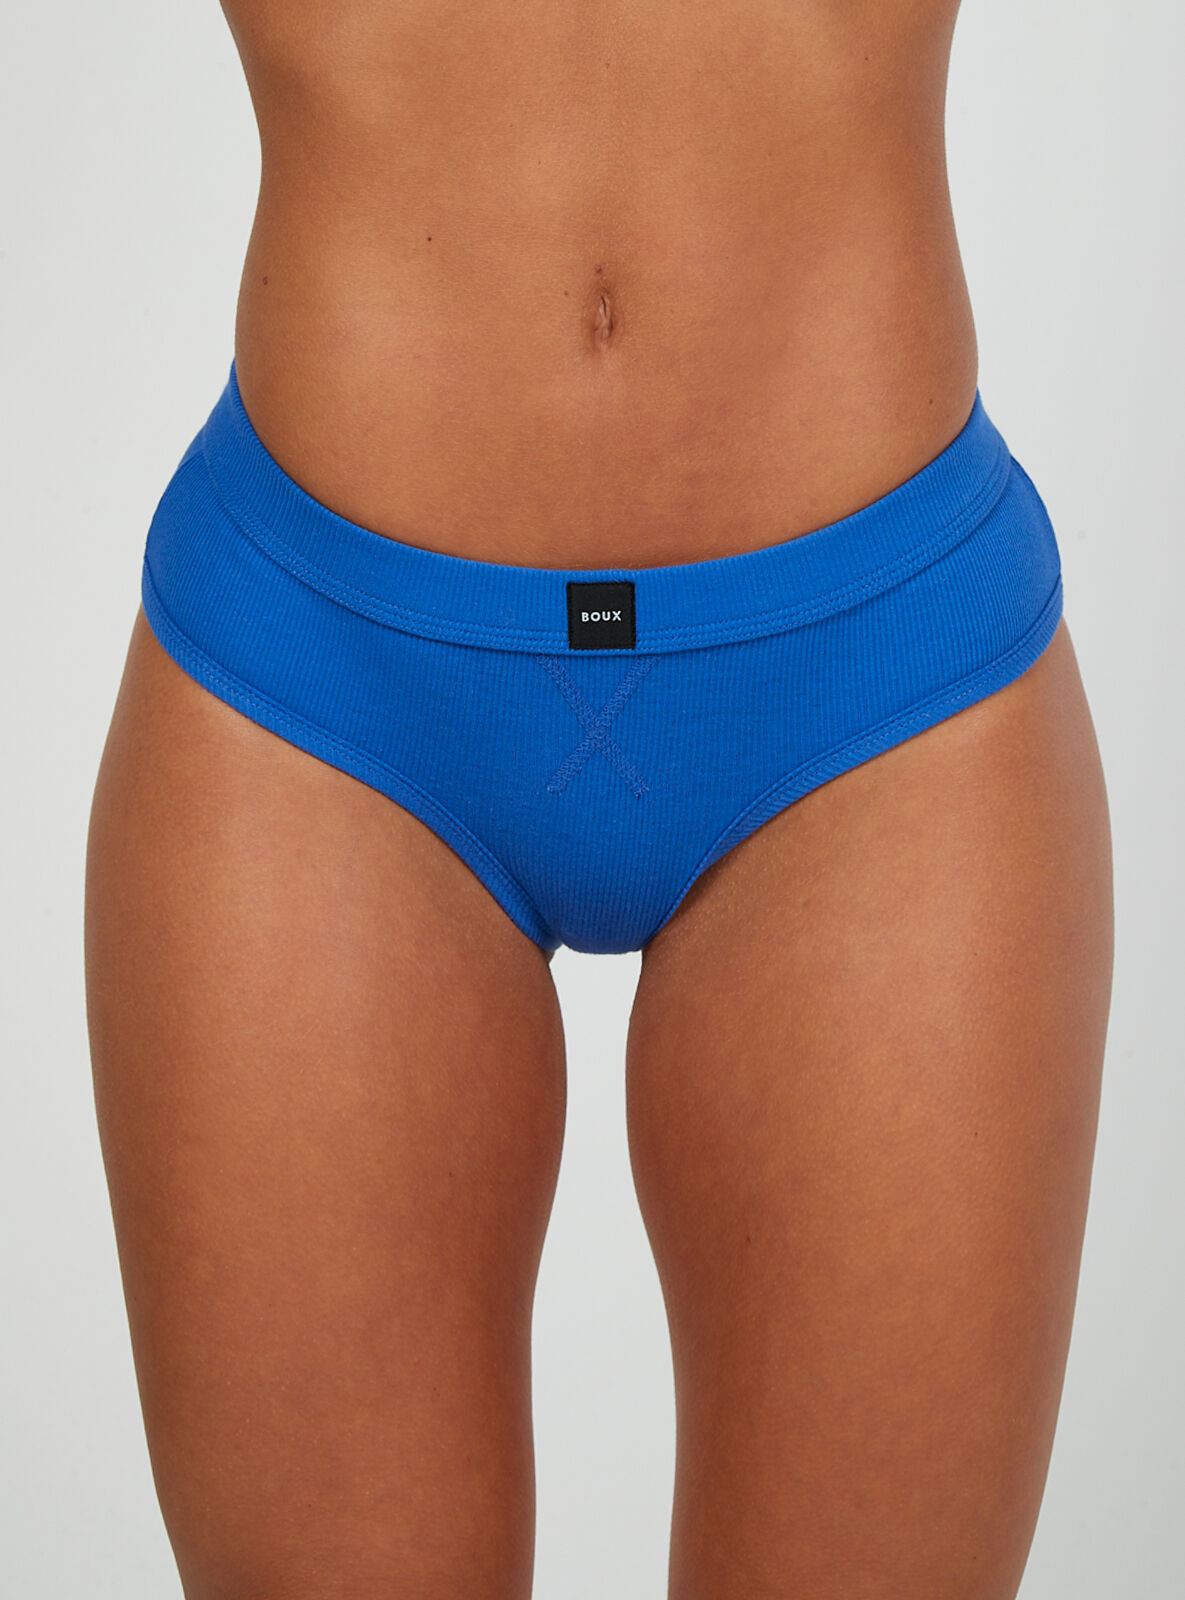 Boux Avenue Nell ribbed cheeky shorts - Cobalt Blue - 08